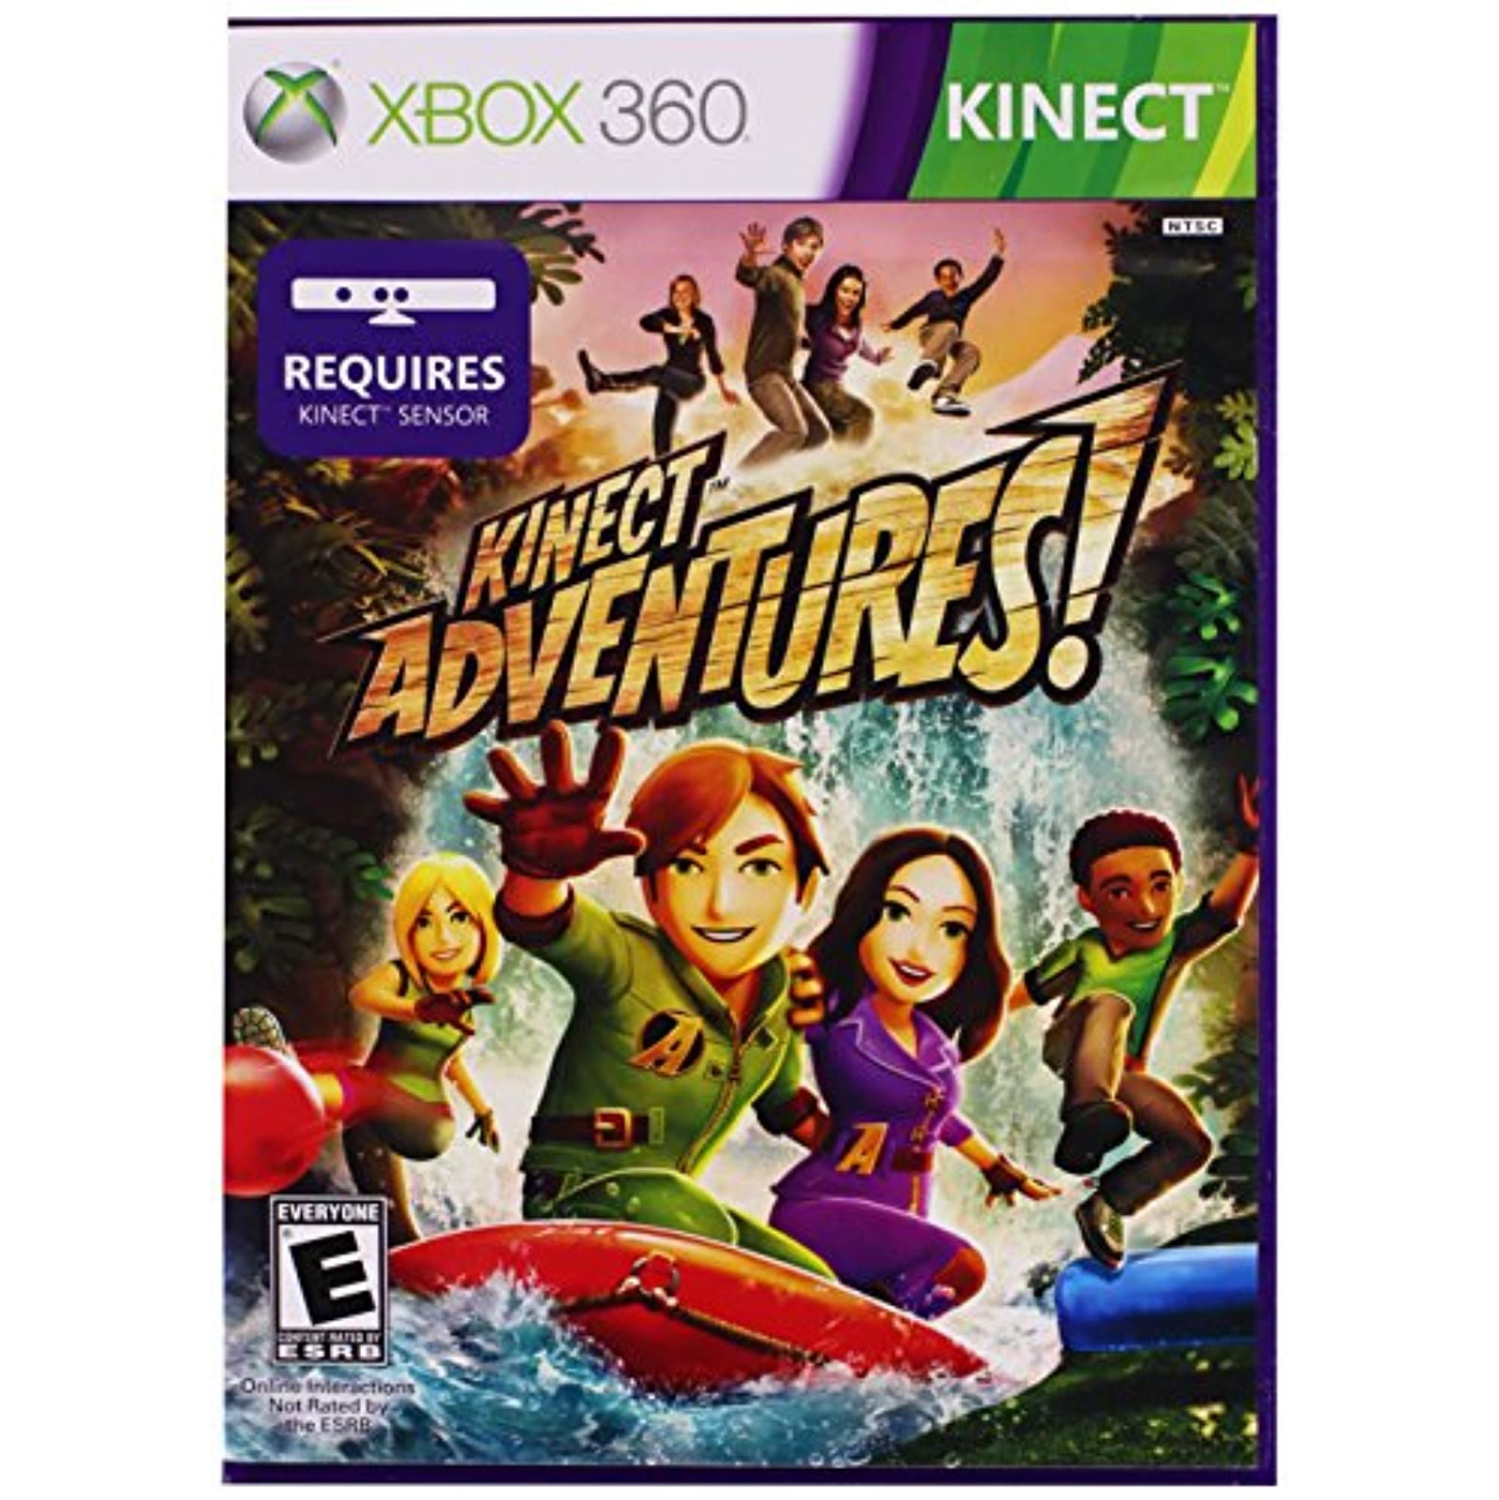 Previously Played - Kinect Adventures! Xbox 360